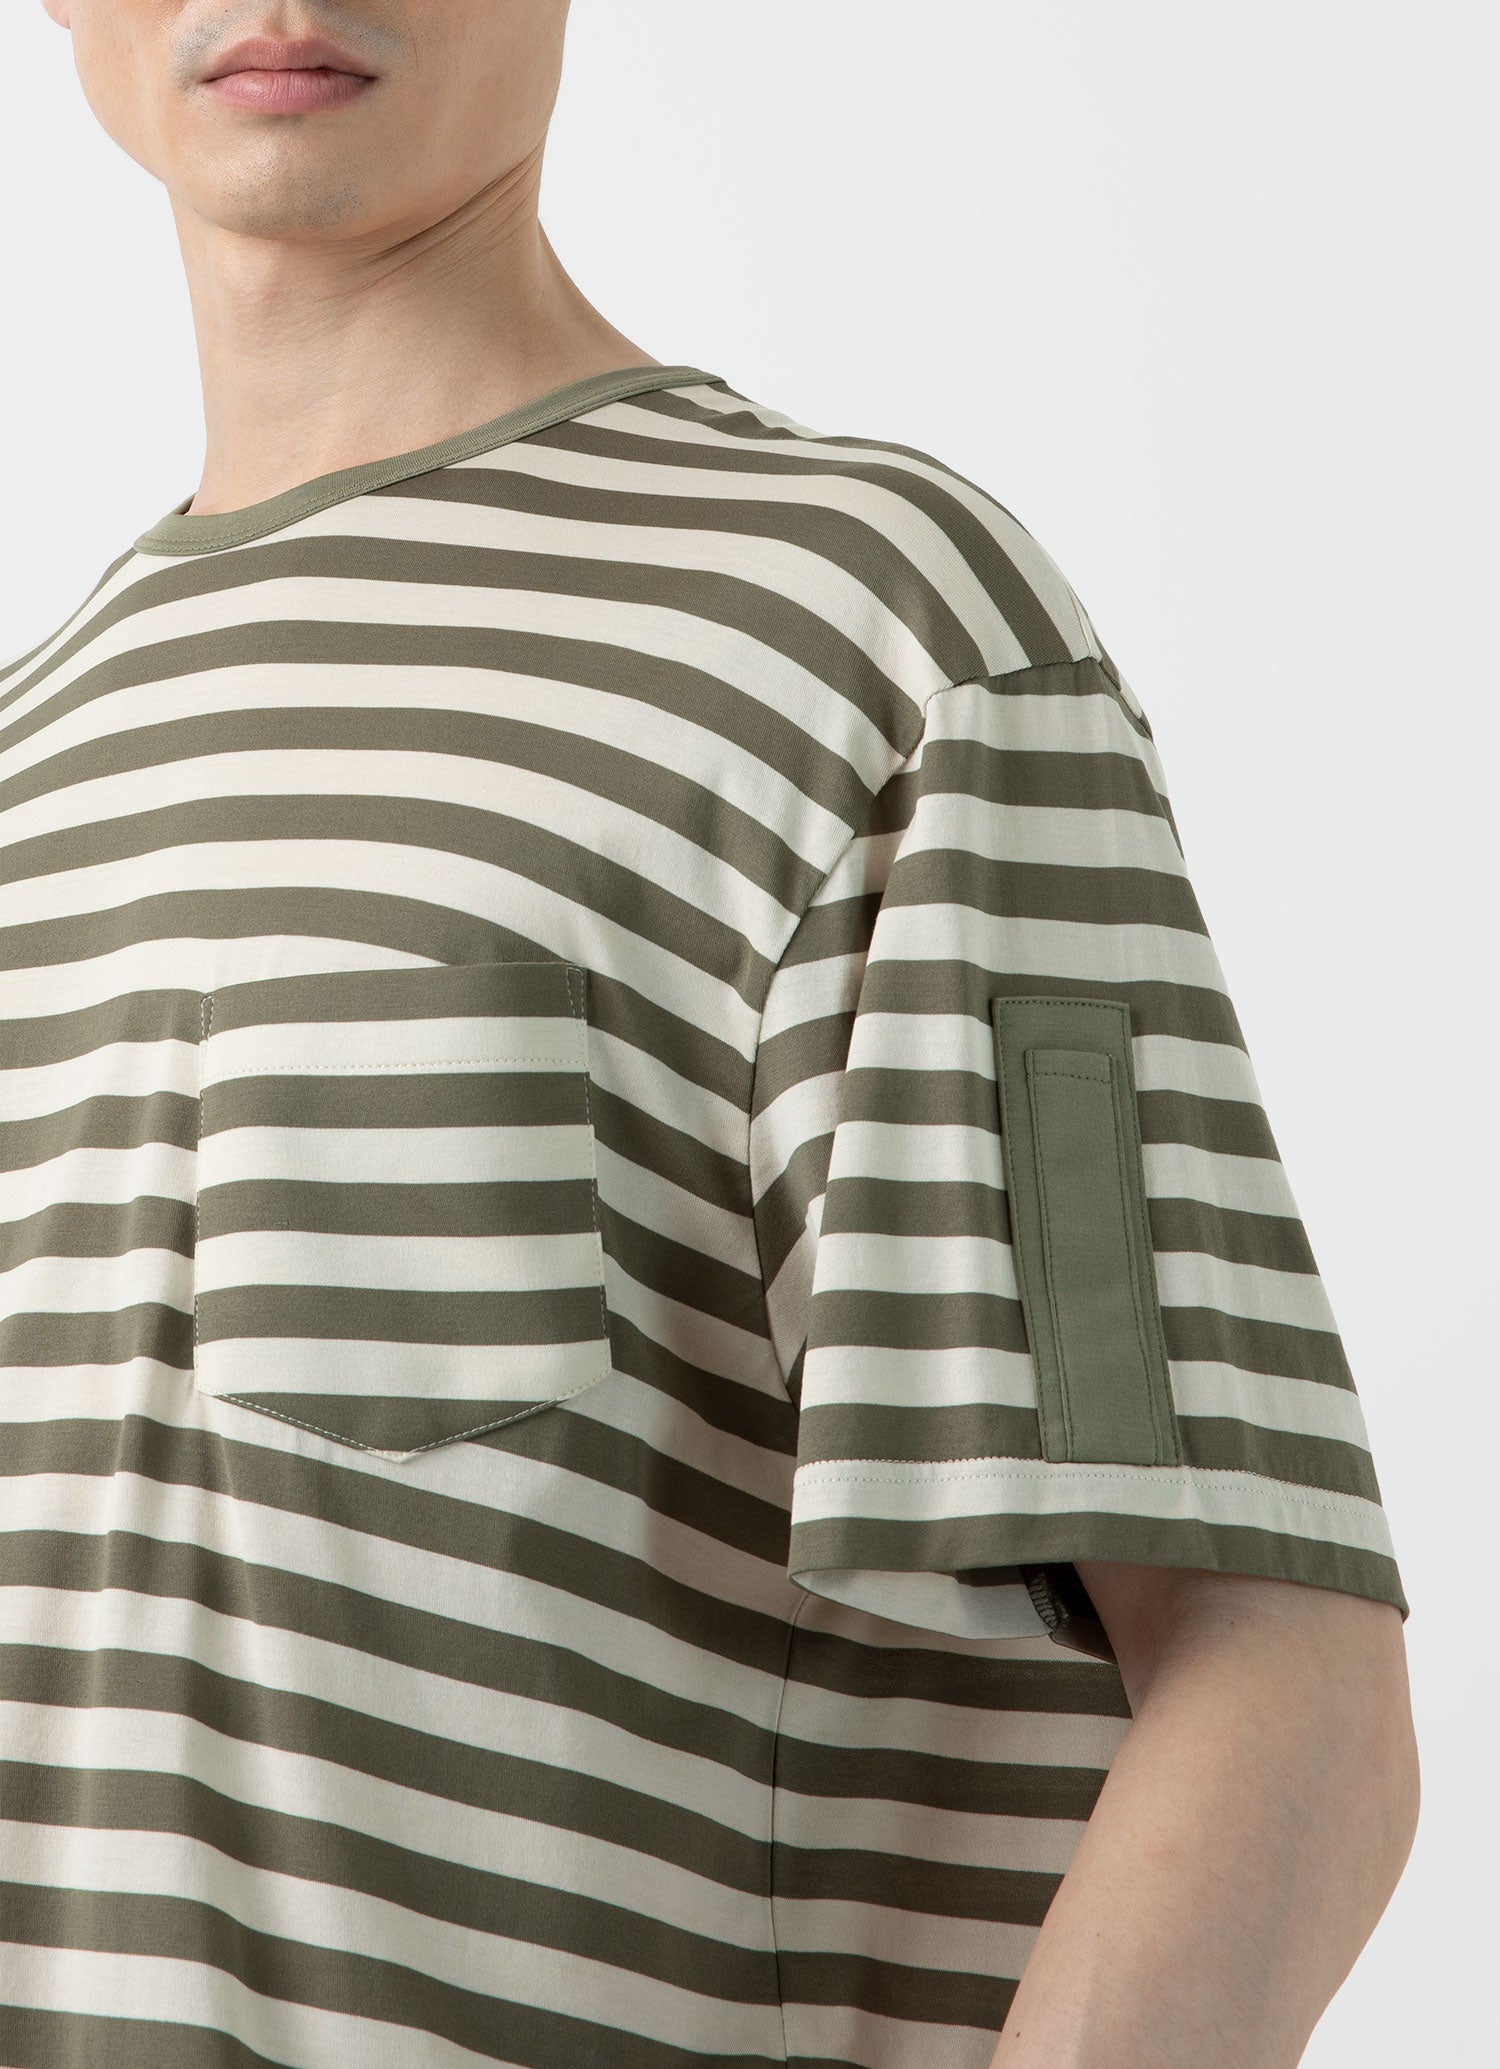 Men's Sunspel x Nigel Cabourn T-shirt in Army Green/Stone White